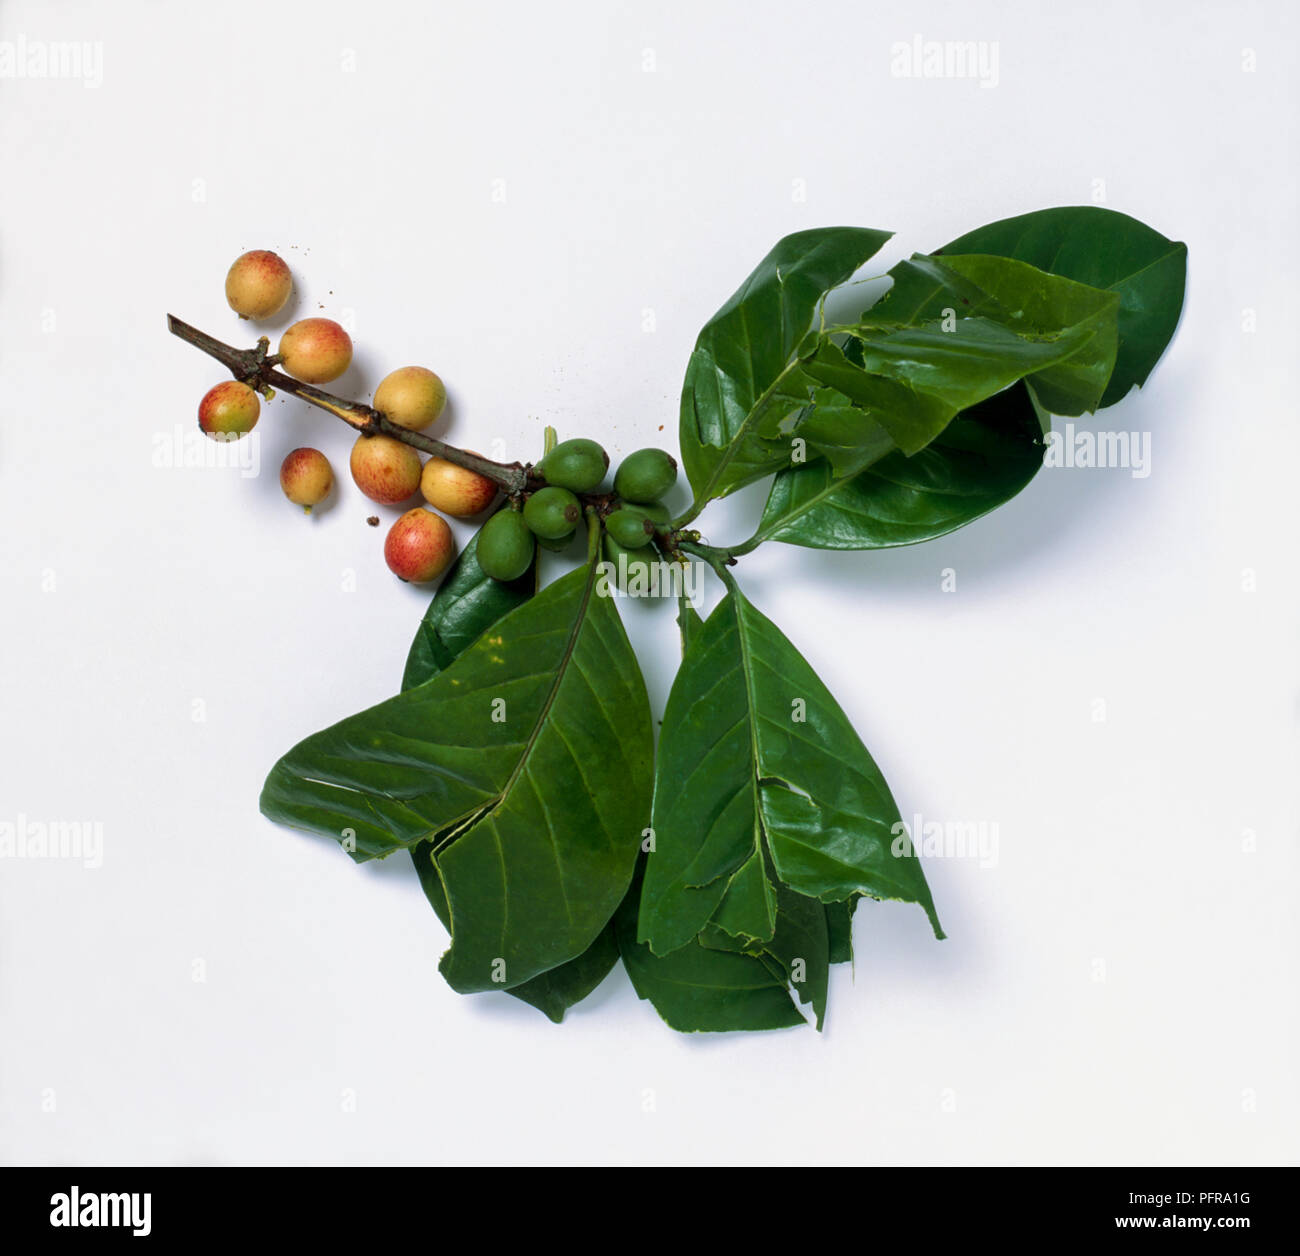 Coffea arabica (Coffee) yellow and red ripe, and green unripe fruit, and leaves on stem cutting Stock Photo